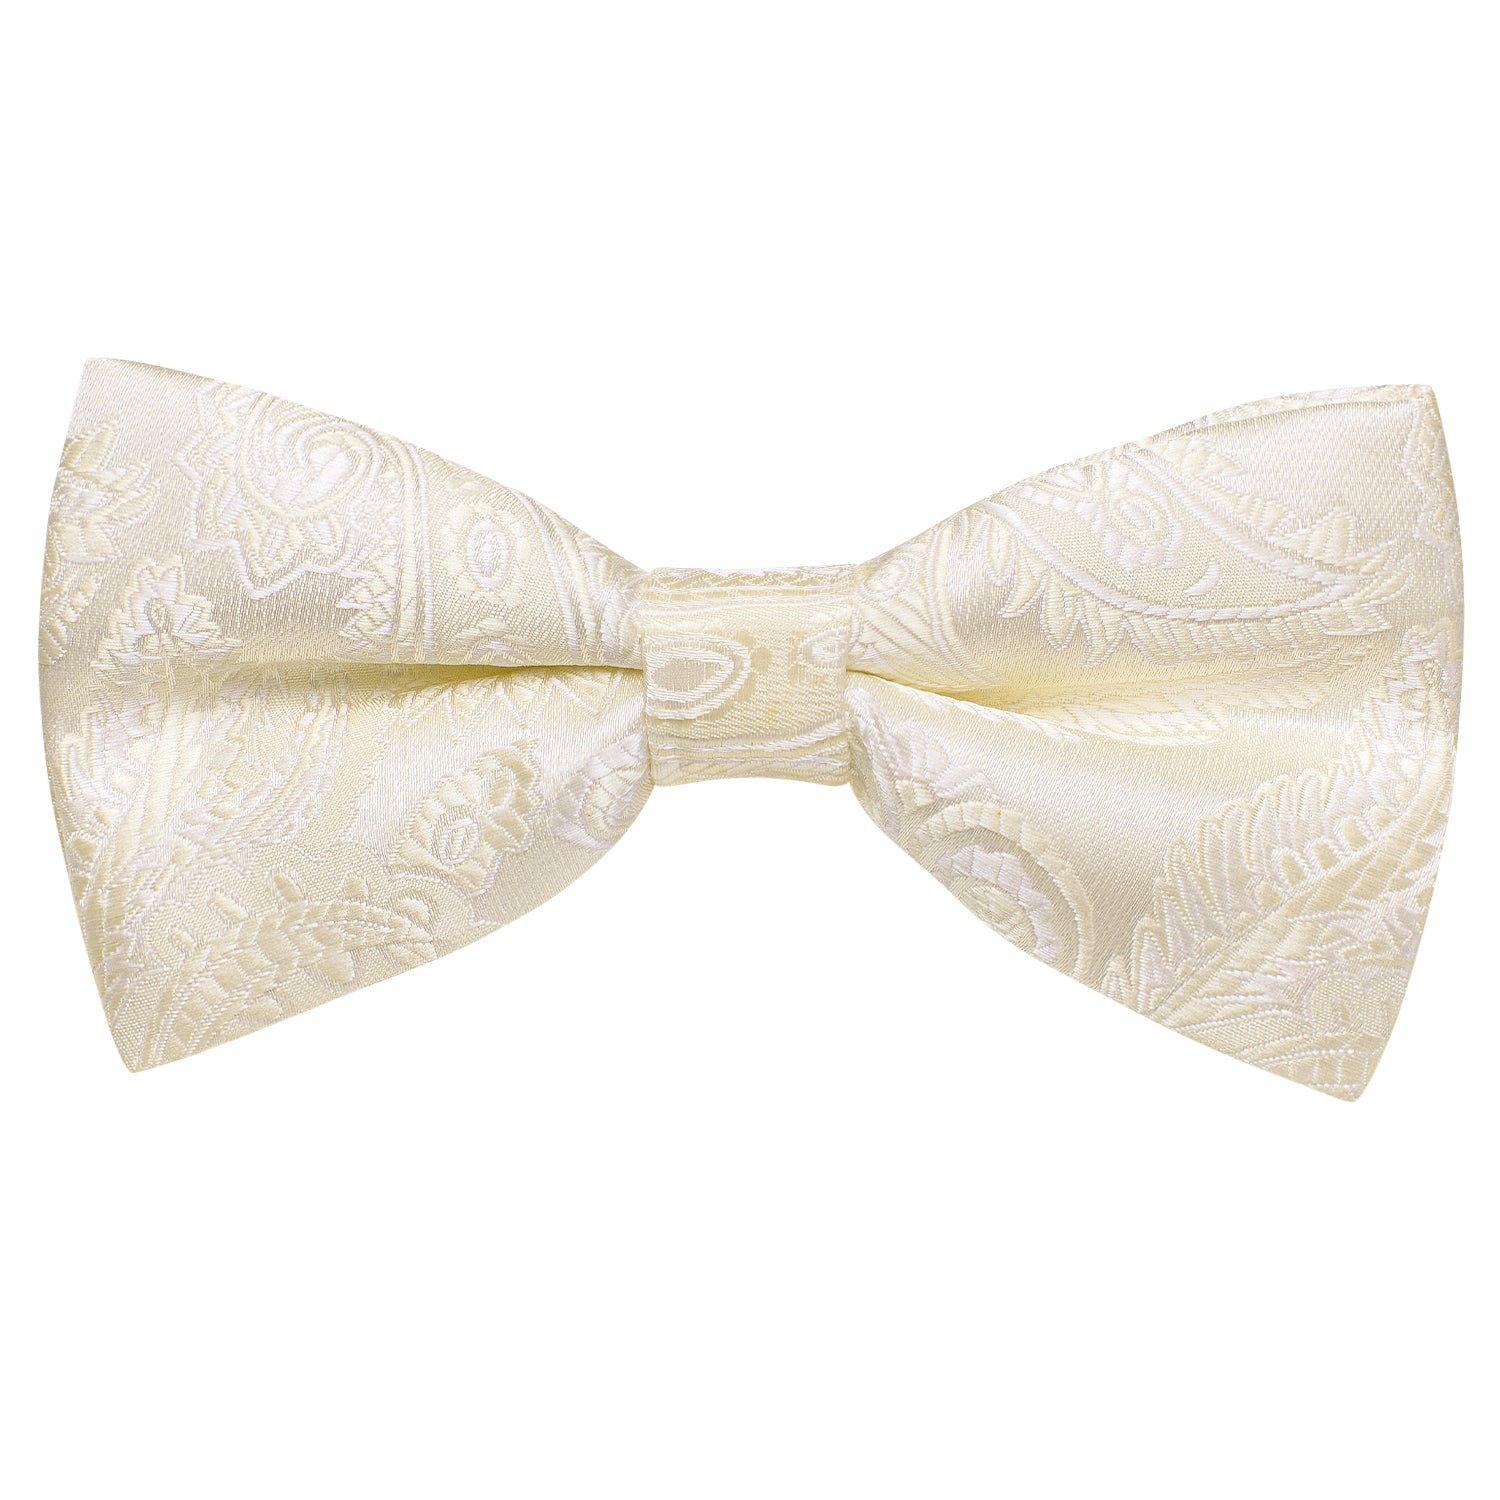 New Champagne White Paisley Pre-tied Bow Tie Hanky Cufflinks Set